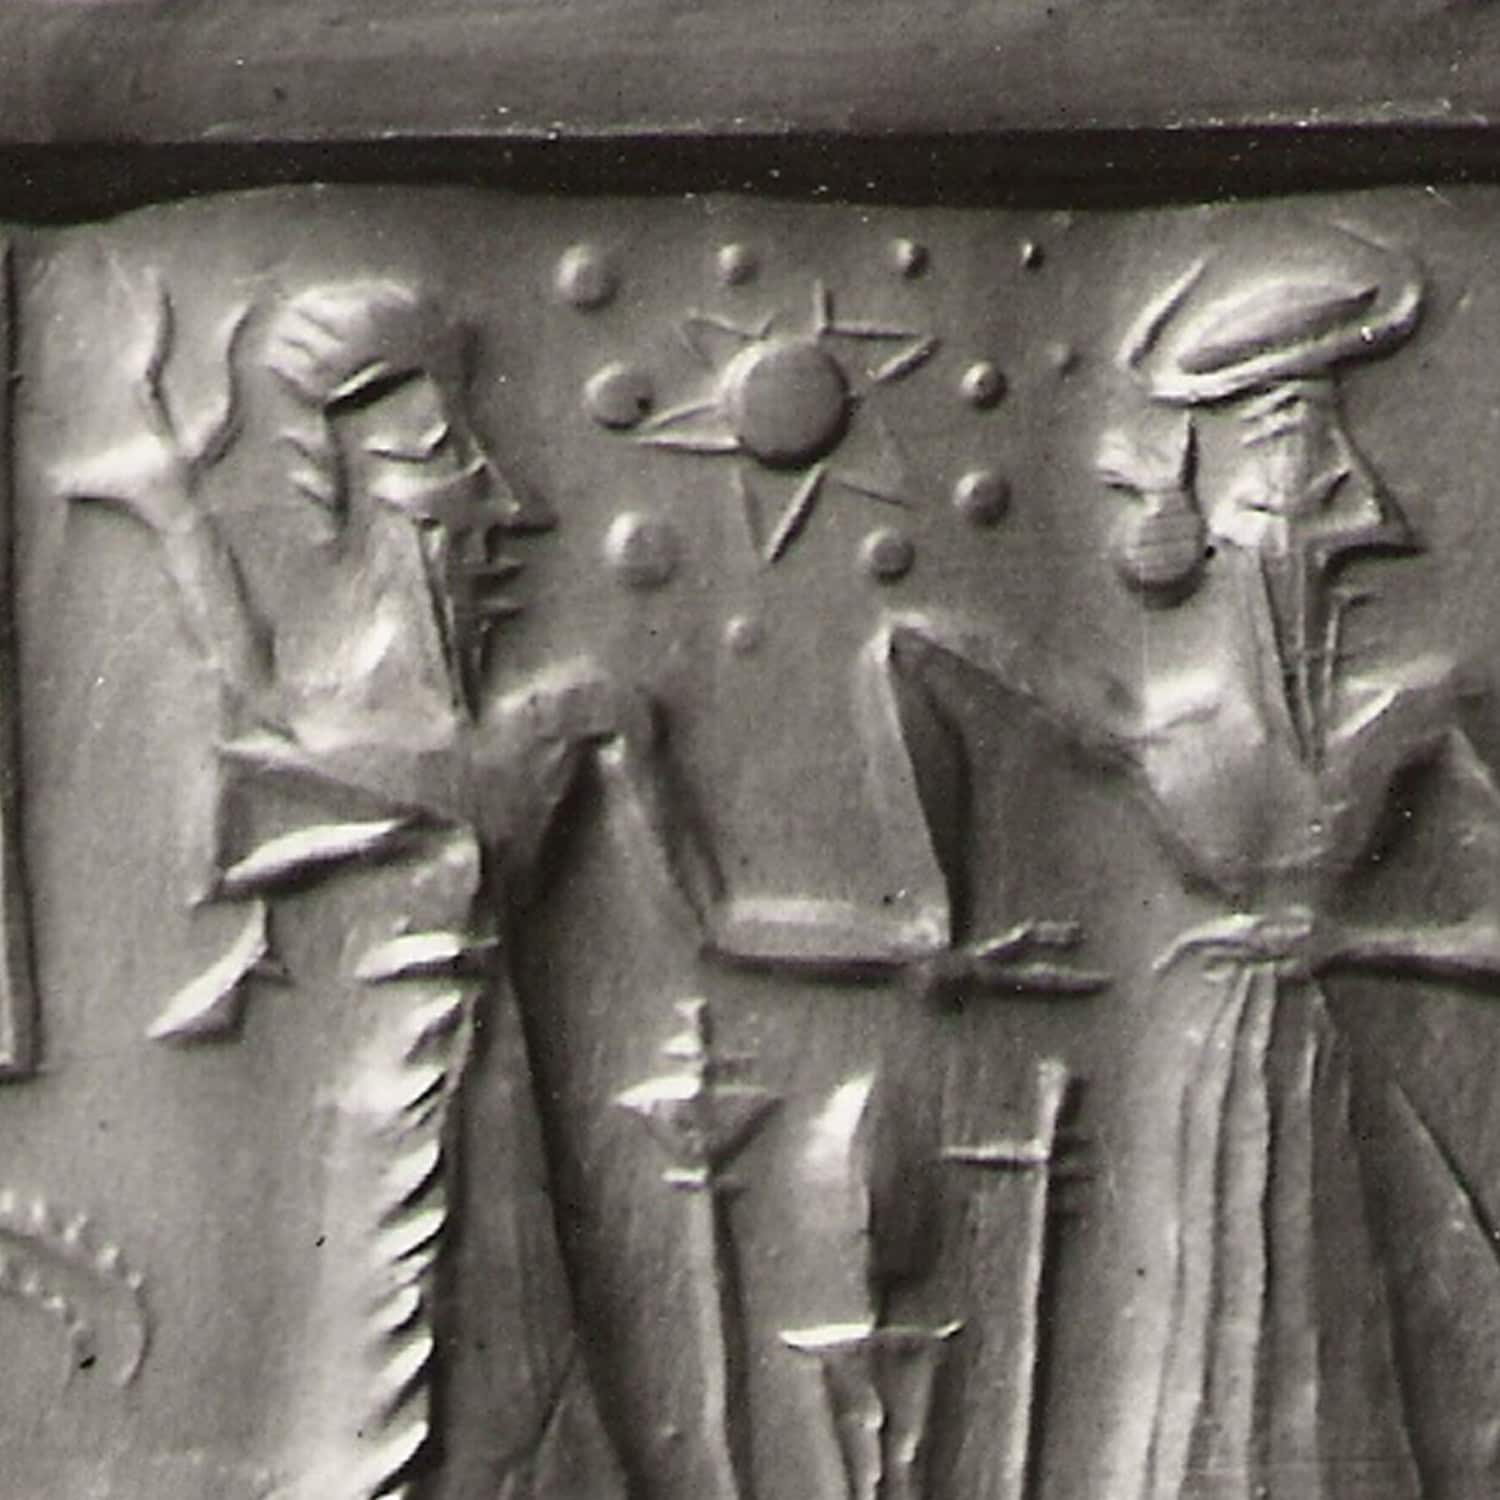 closeup - This Ancient Sumerian Cylinder Seal is said to depict 12 planets in our Solar System